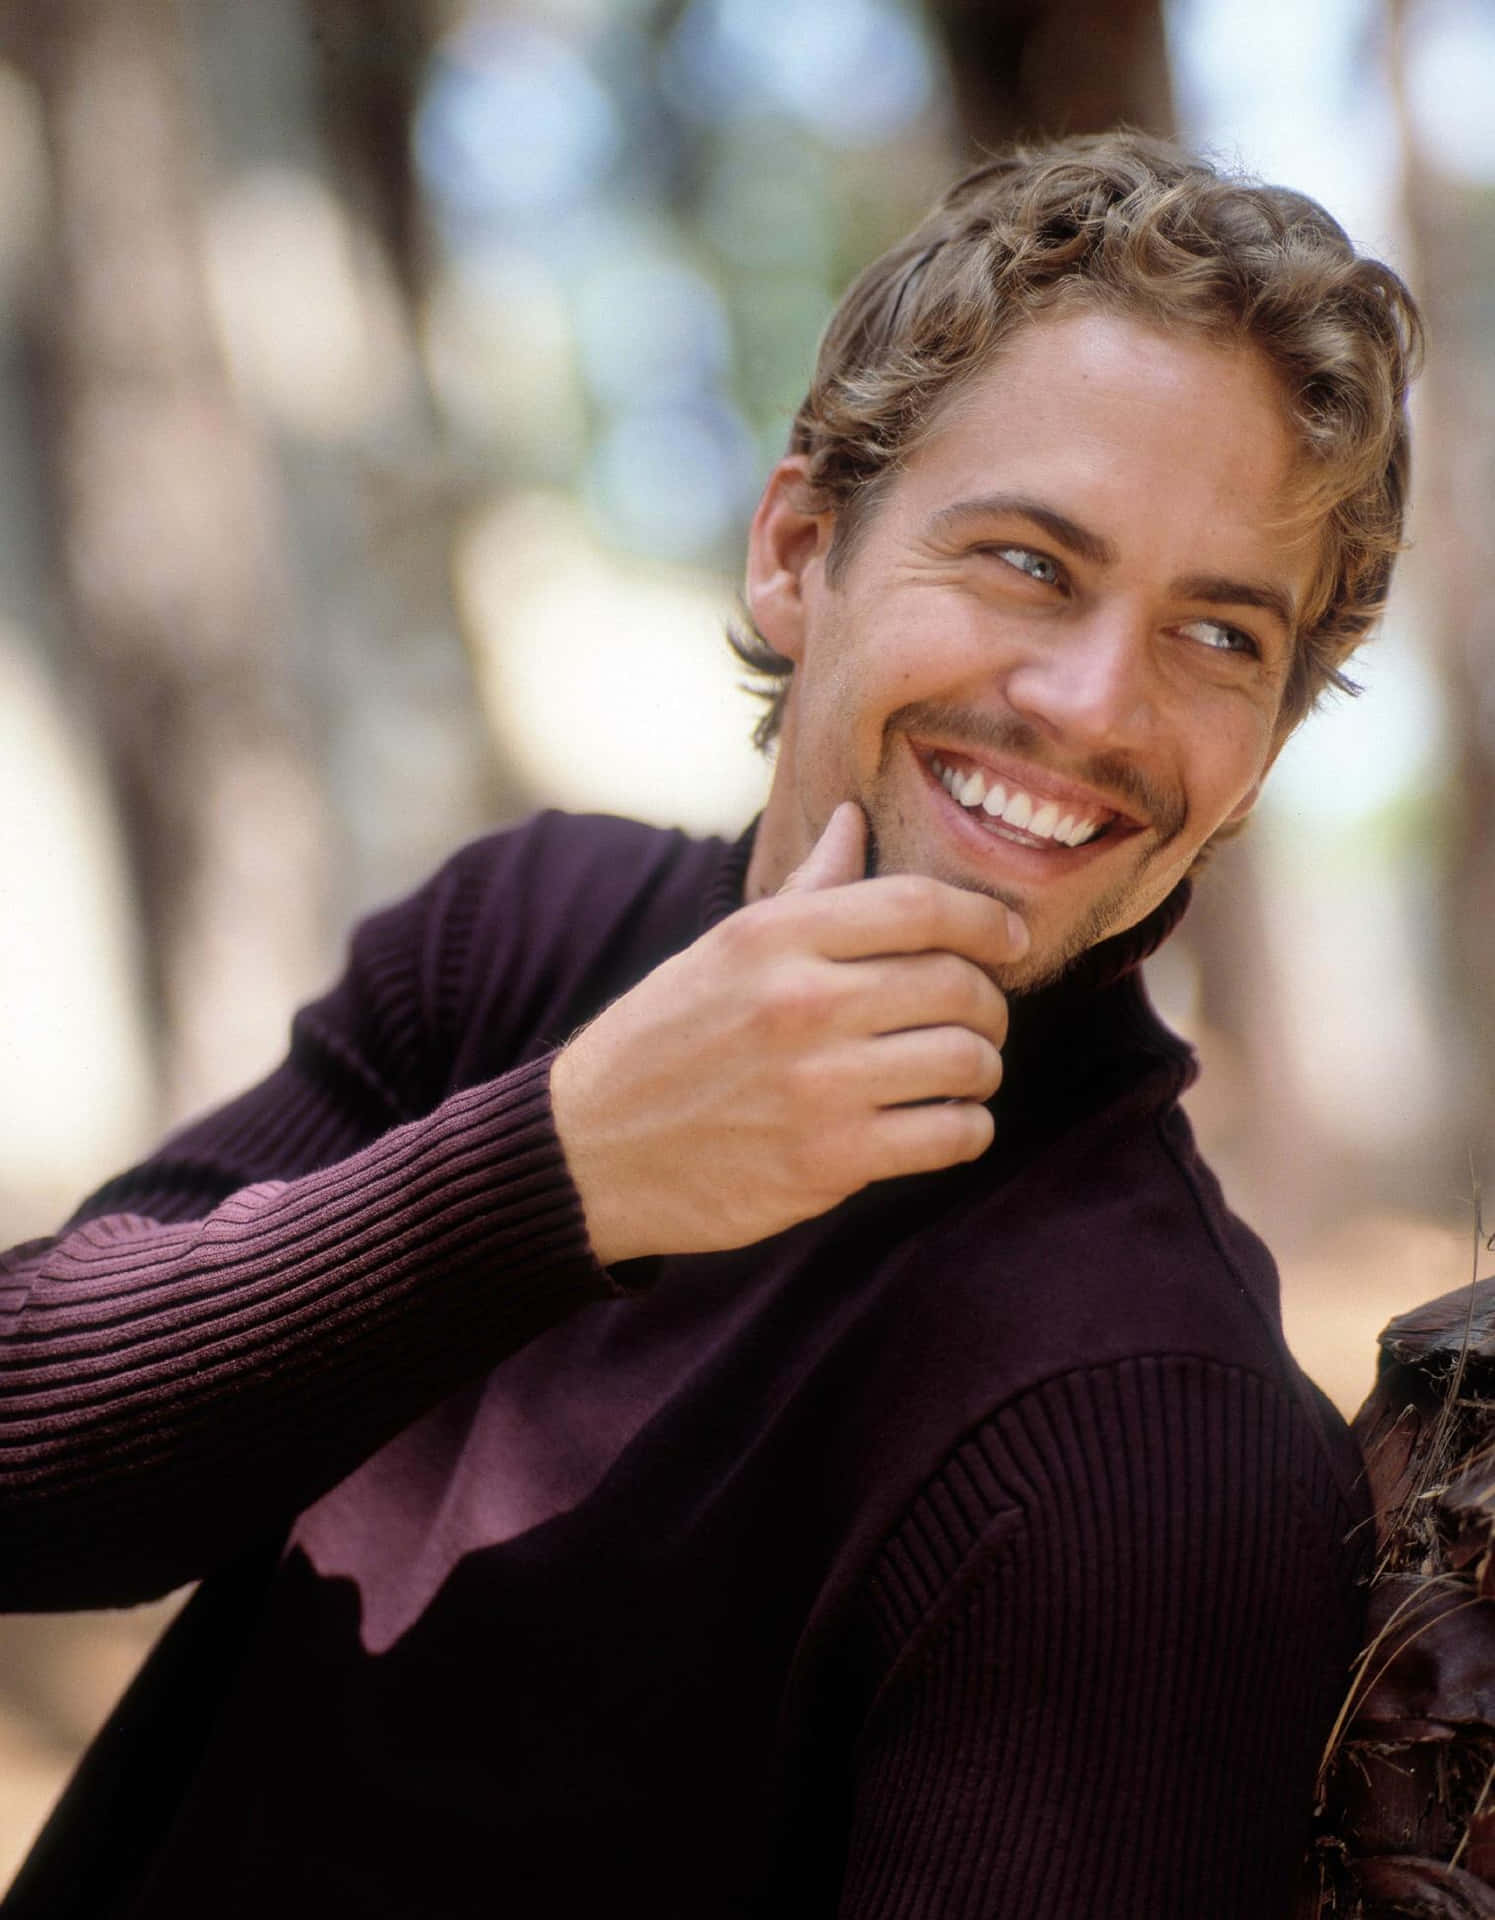 Paul Walker wearing a casual outfit while posing for the camera